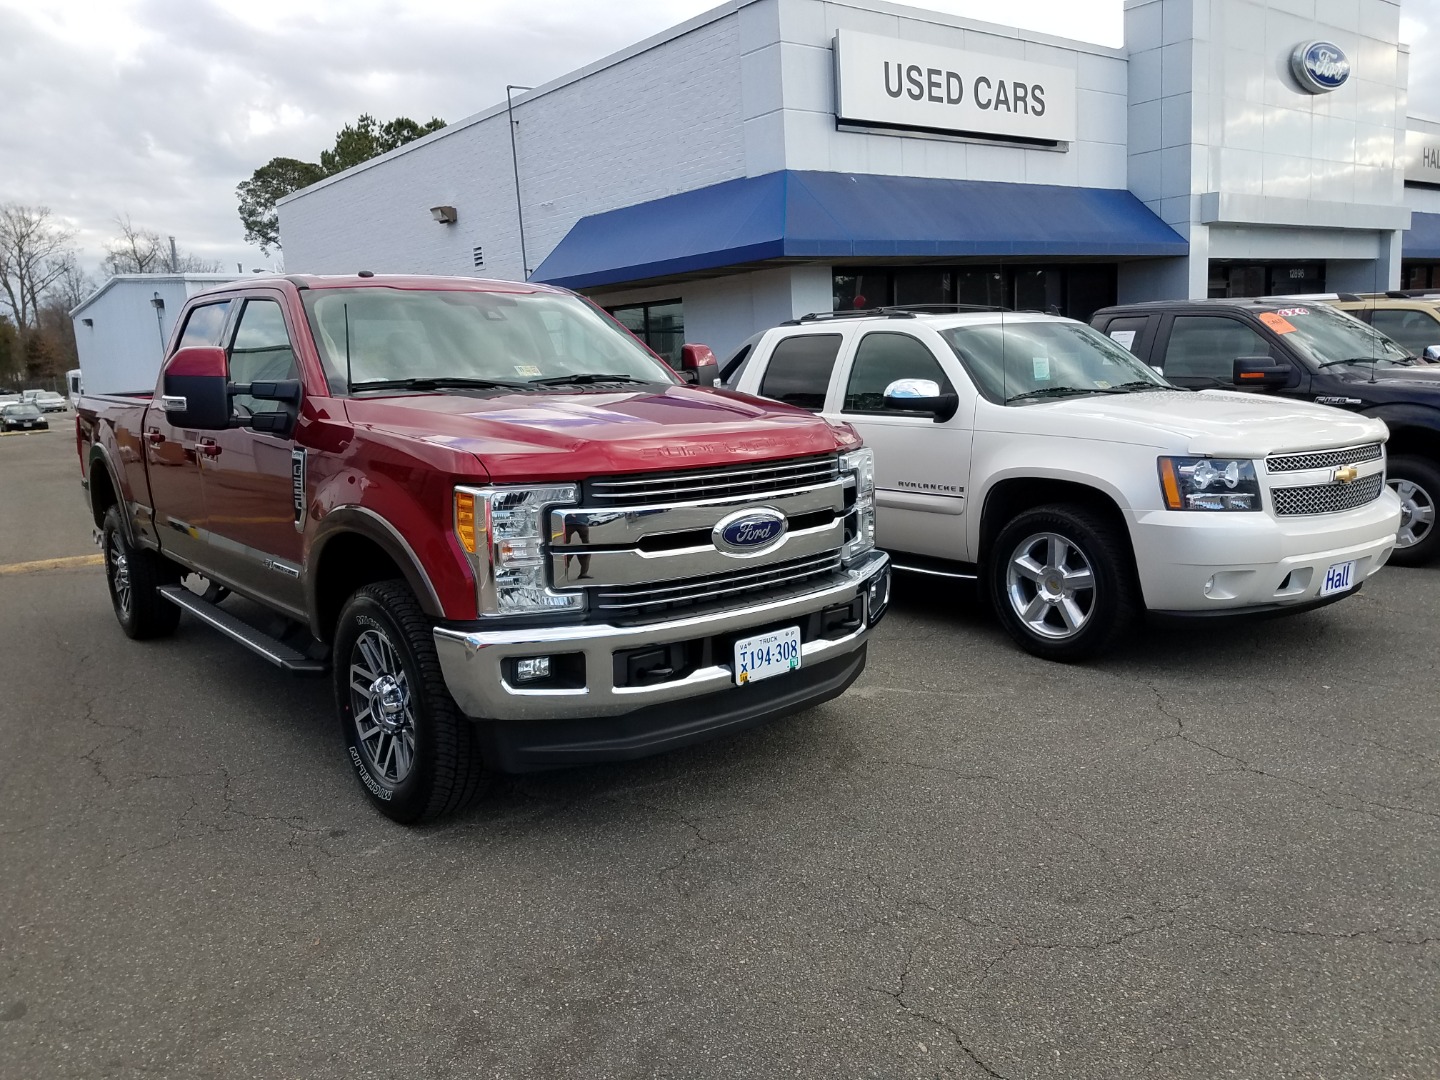 Southern Ford Newport News